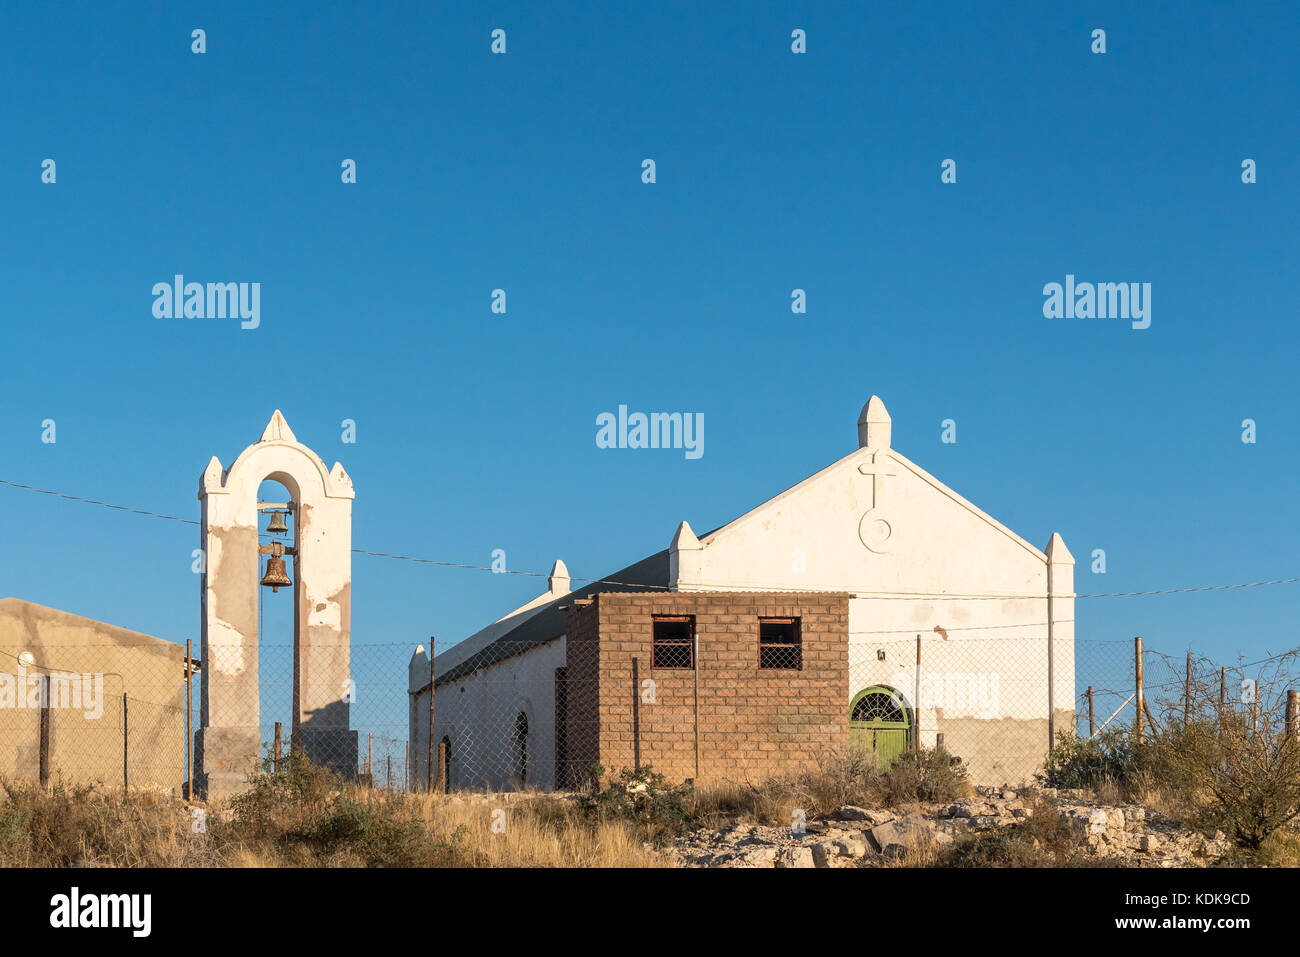 RIETFONTEIN, SOUTH AFRICA - JULY 6, 2017: An historic church at Rietfontein, a small town in the Northern Cape Province of South Africa on the border  Stock Photo